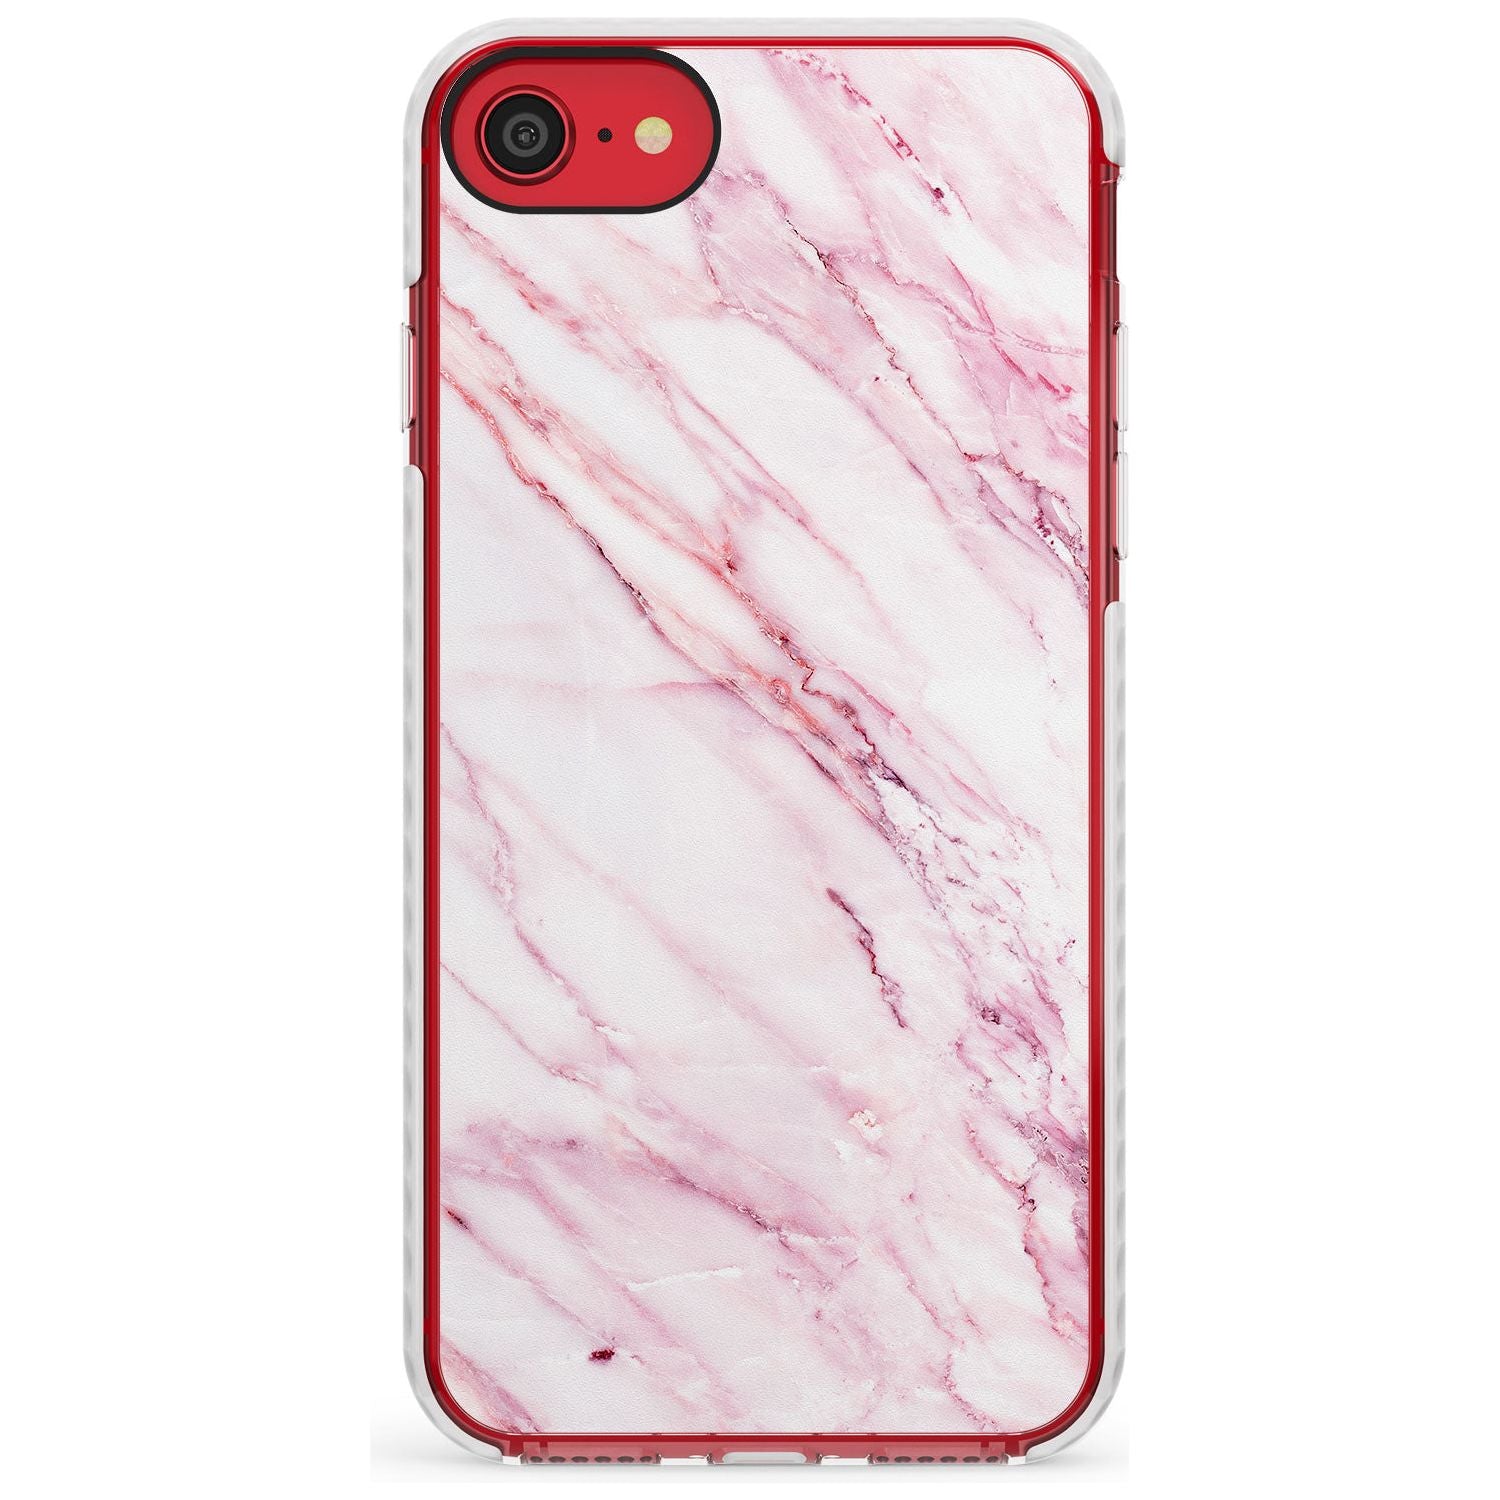 White & Pink Onyx Marble Texture Slim TPU Phone Case for iPhone SE 8 7 Plus